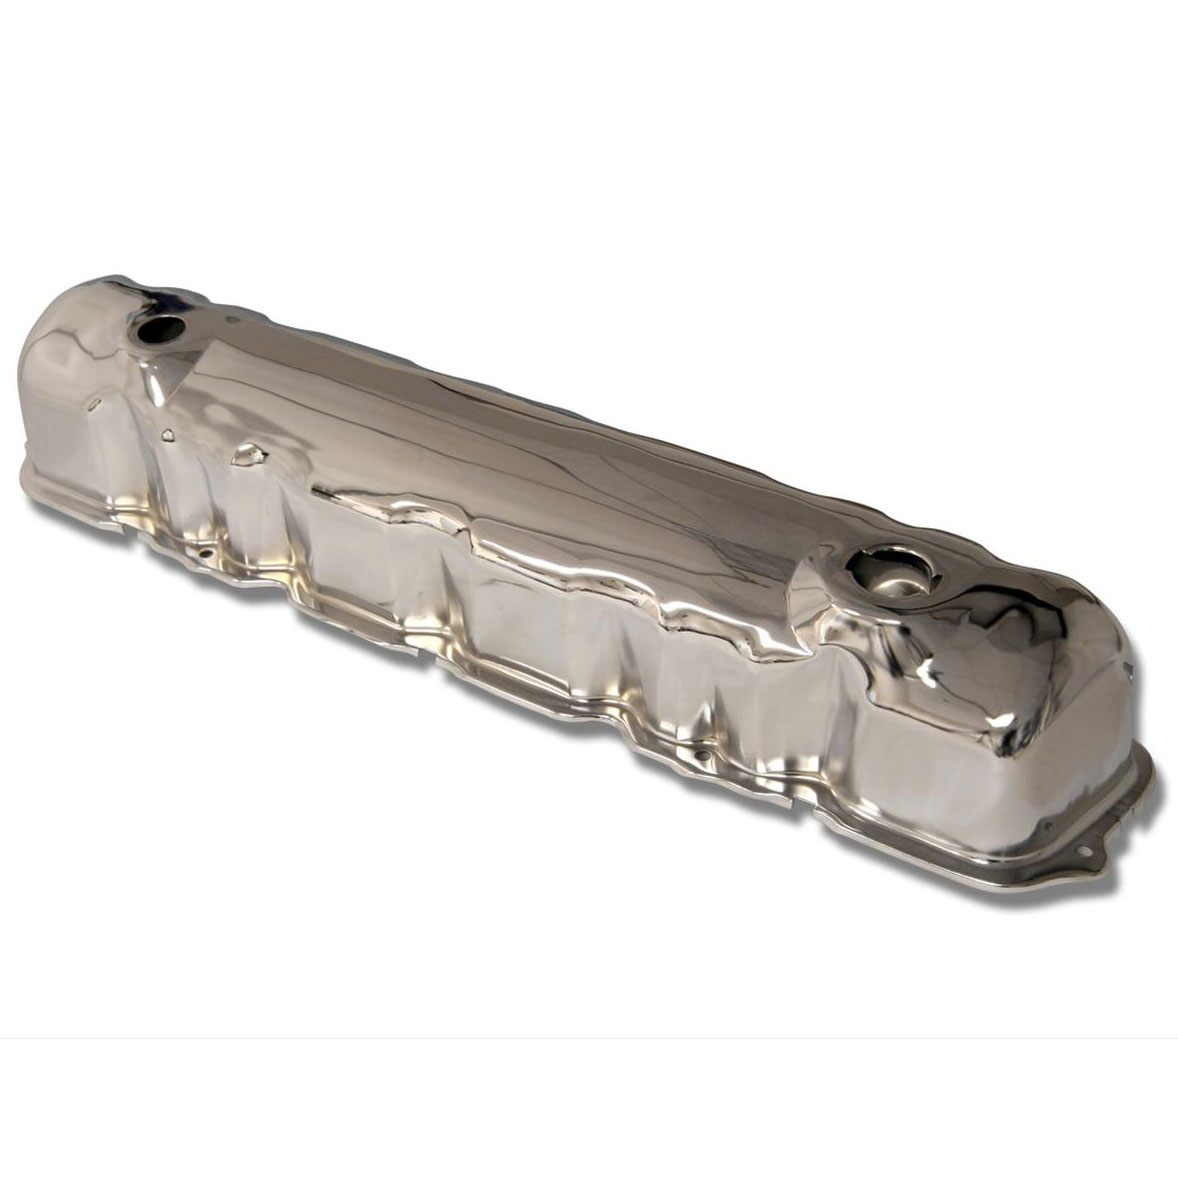 Chrome 6-cylinder Valve Cover, 170 200 inline 6cyl, 66-77 Bronco